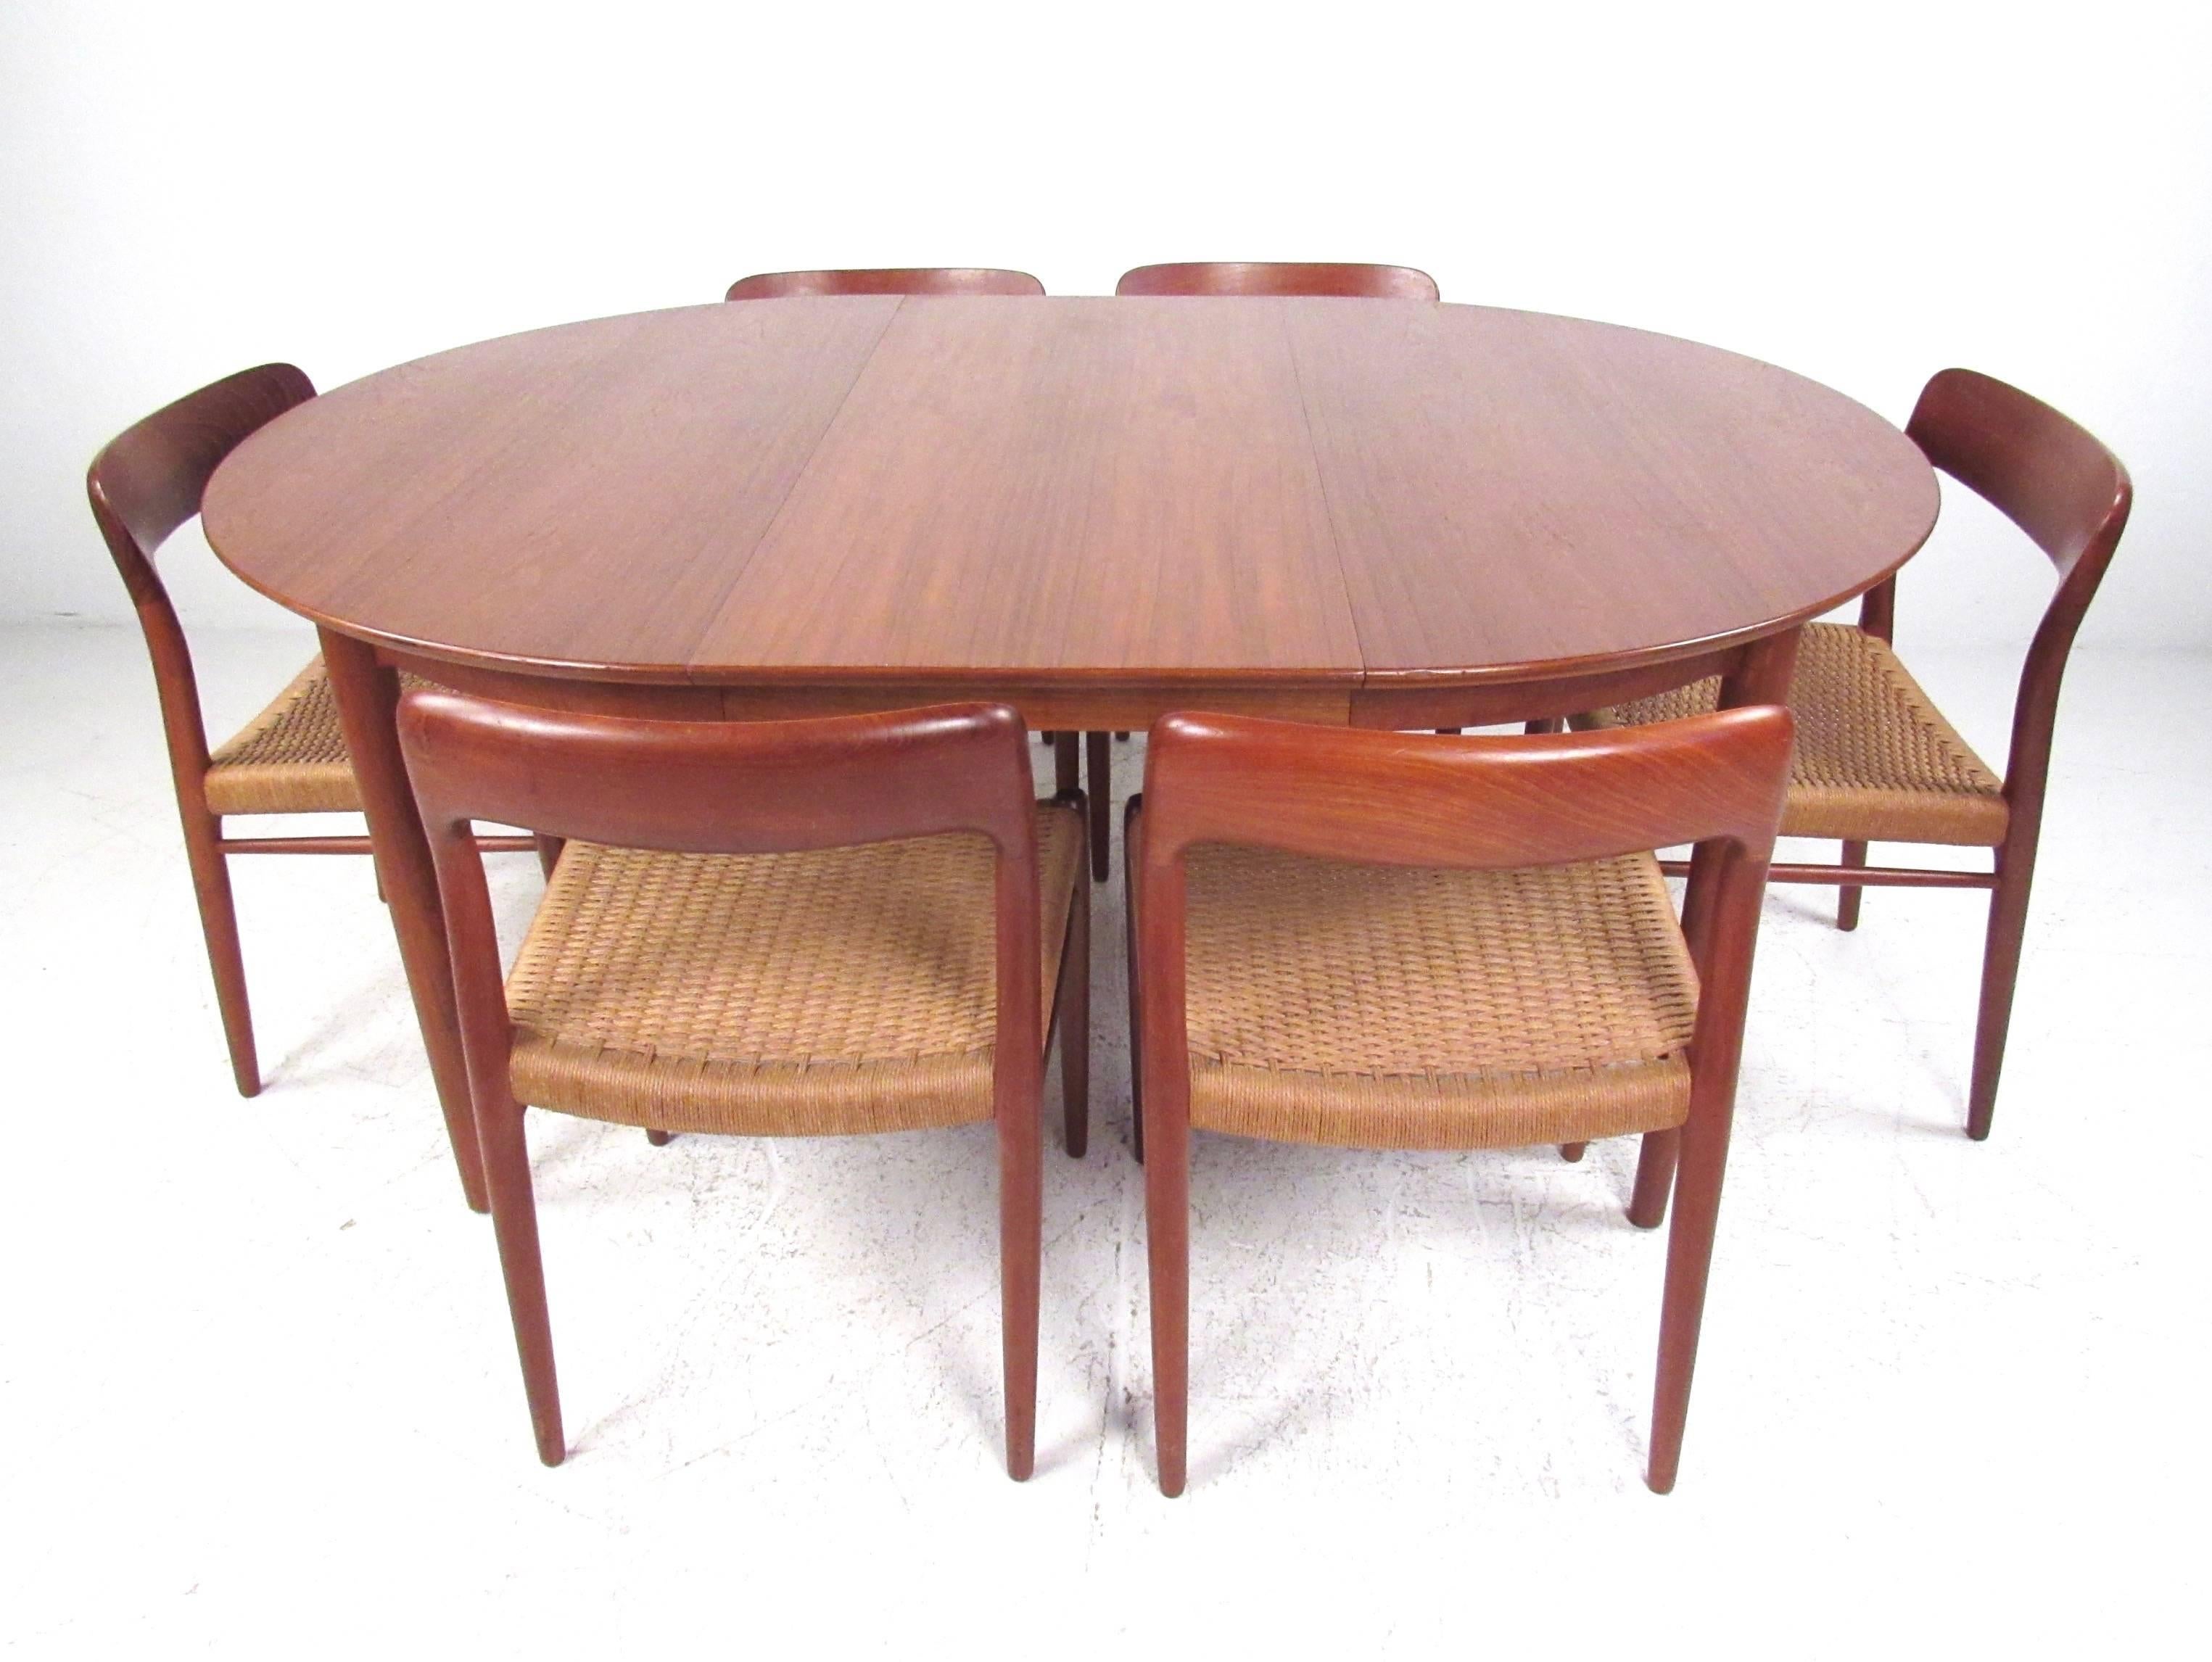 Mid-Century Modern N.O. Møller Teak Dining Table With Papercord Chairs